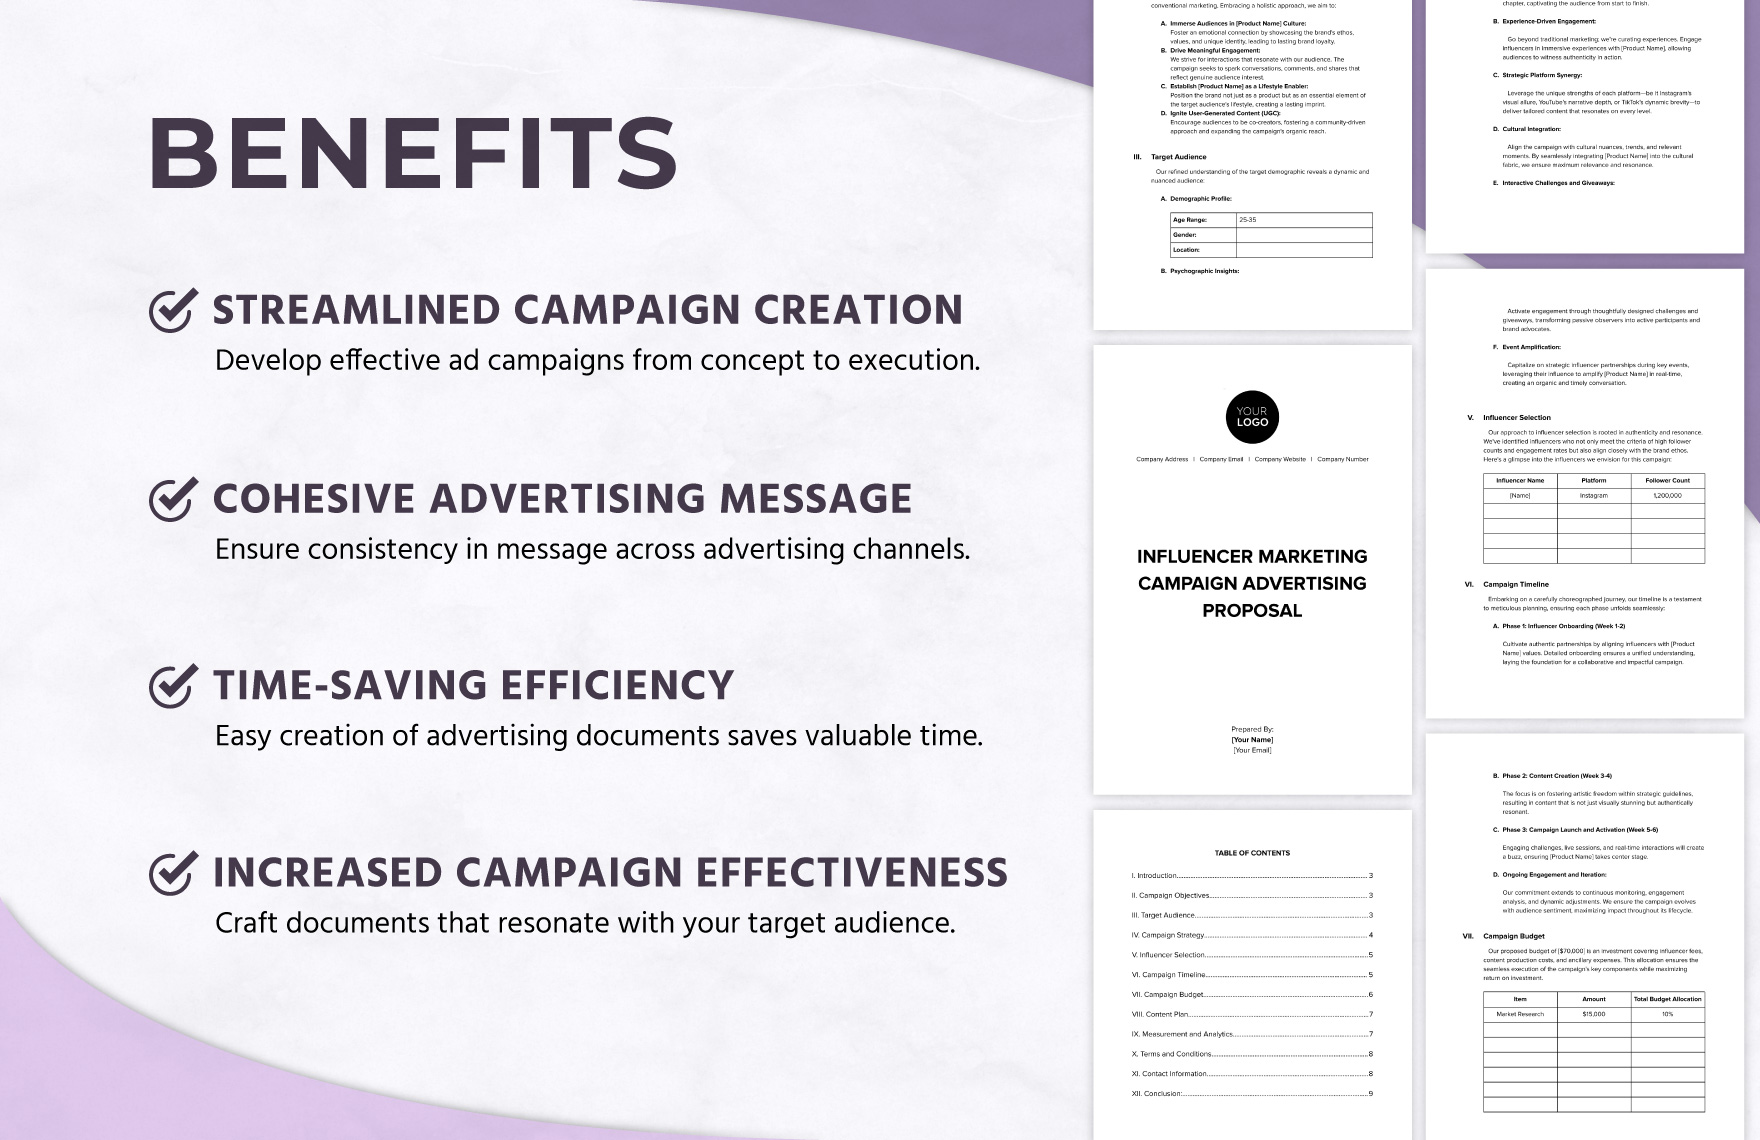 Influencer Marketing Campaign Advertising Proposal Template